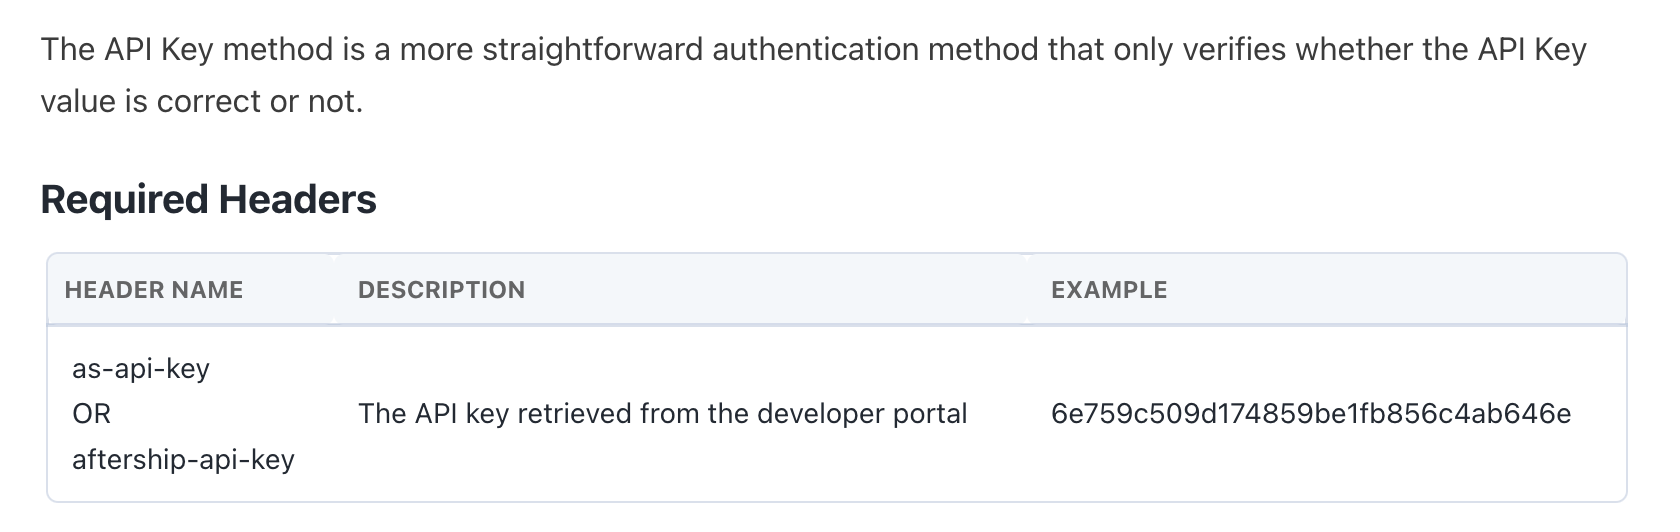 AfterShip Authentication Overview